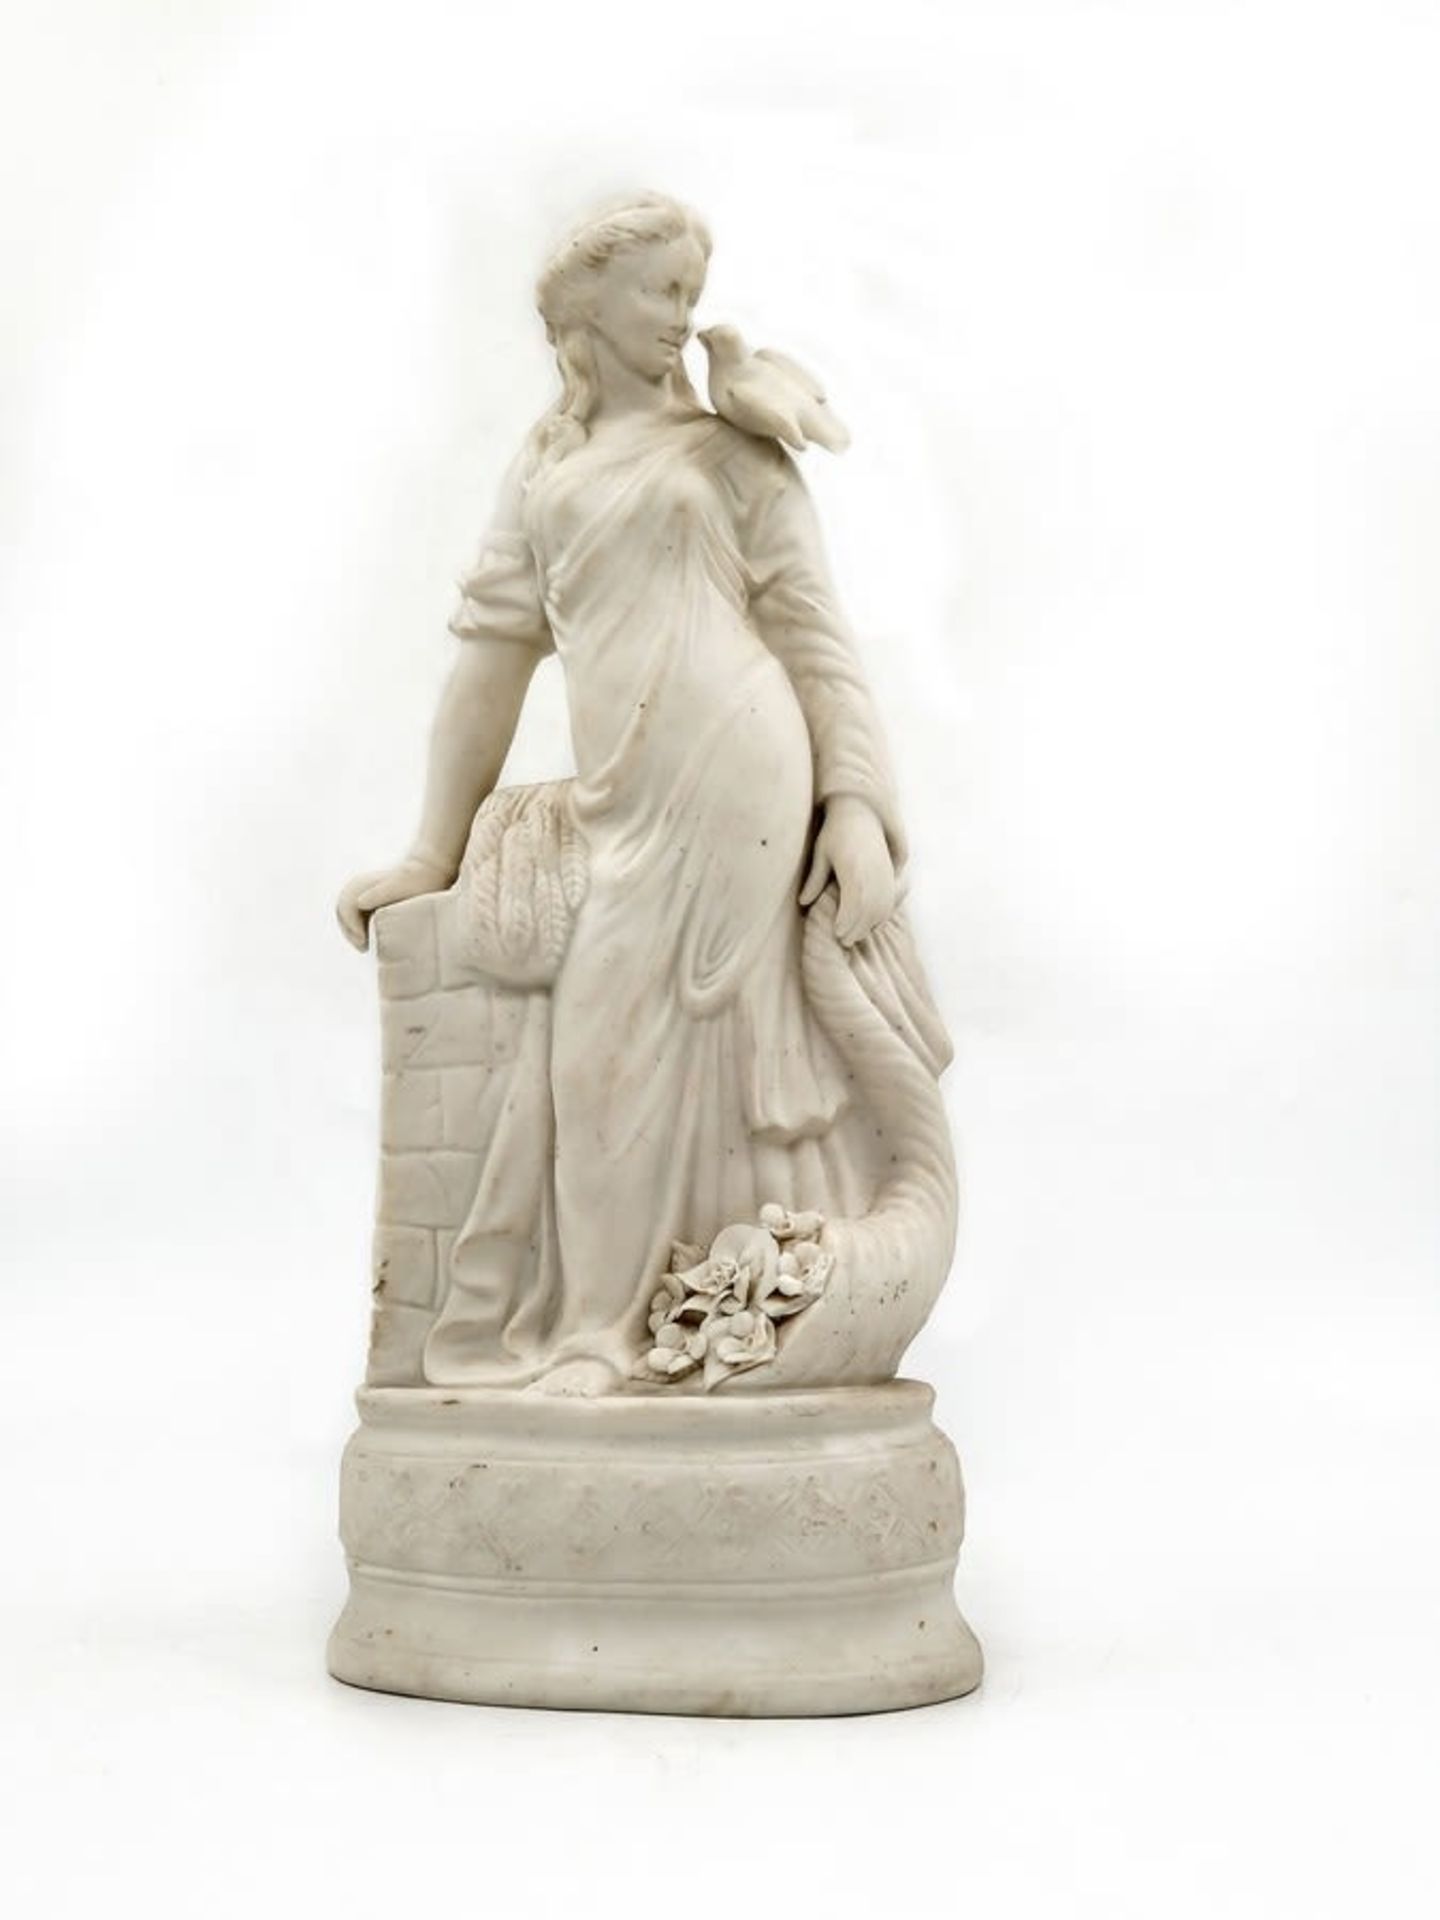 An antique English 'Parian ware', sculpture from the 19th century, in the image of the earth goddess